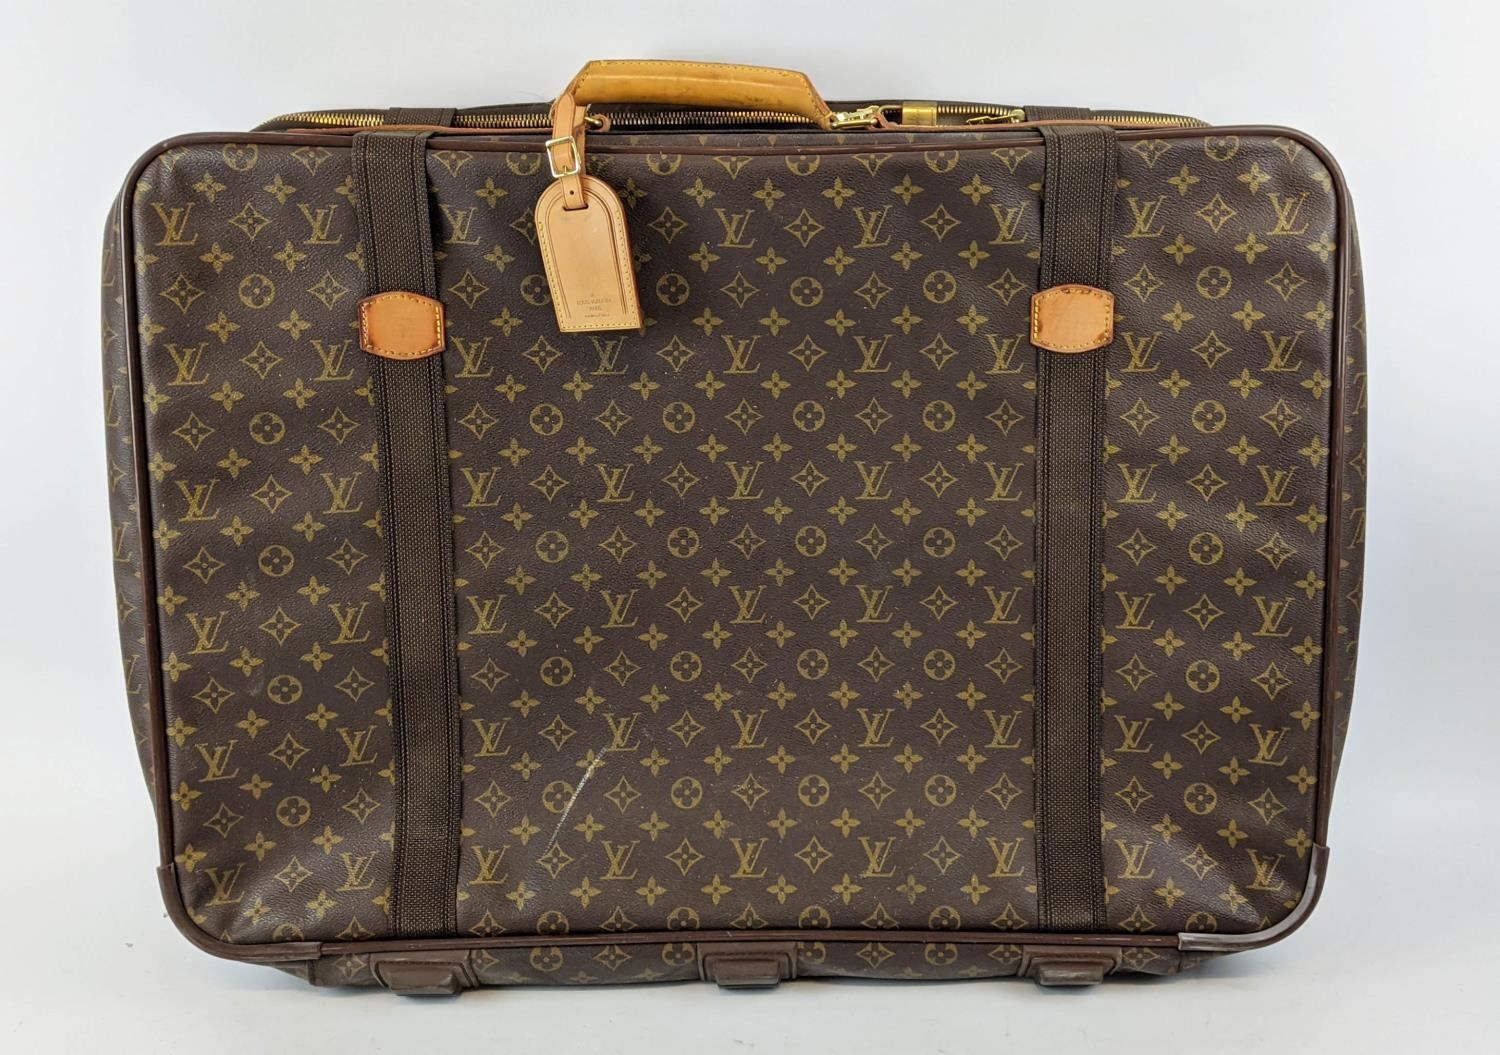 LOUIS VUITTON SATELLITE 70 SUITCASE, monogram canvas and leather, brass hardware, double buckle - Image 3 of 8